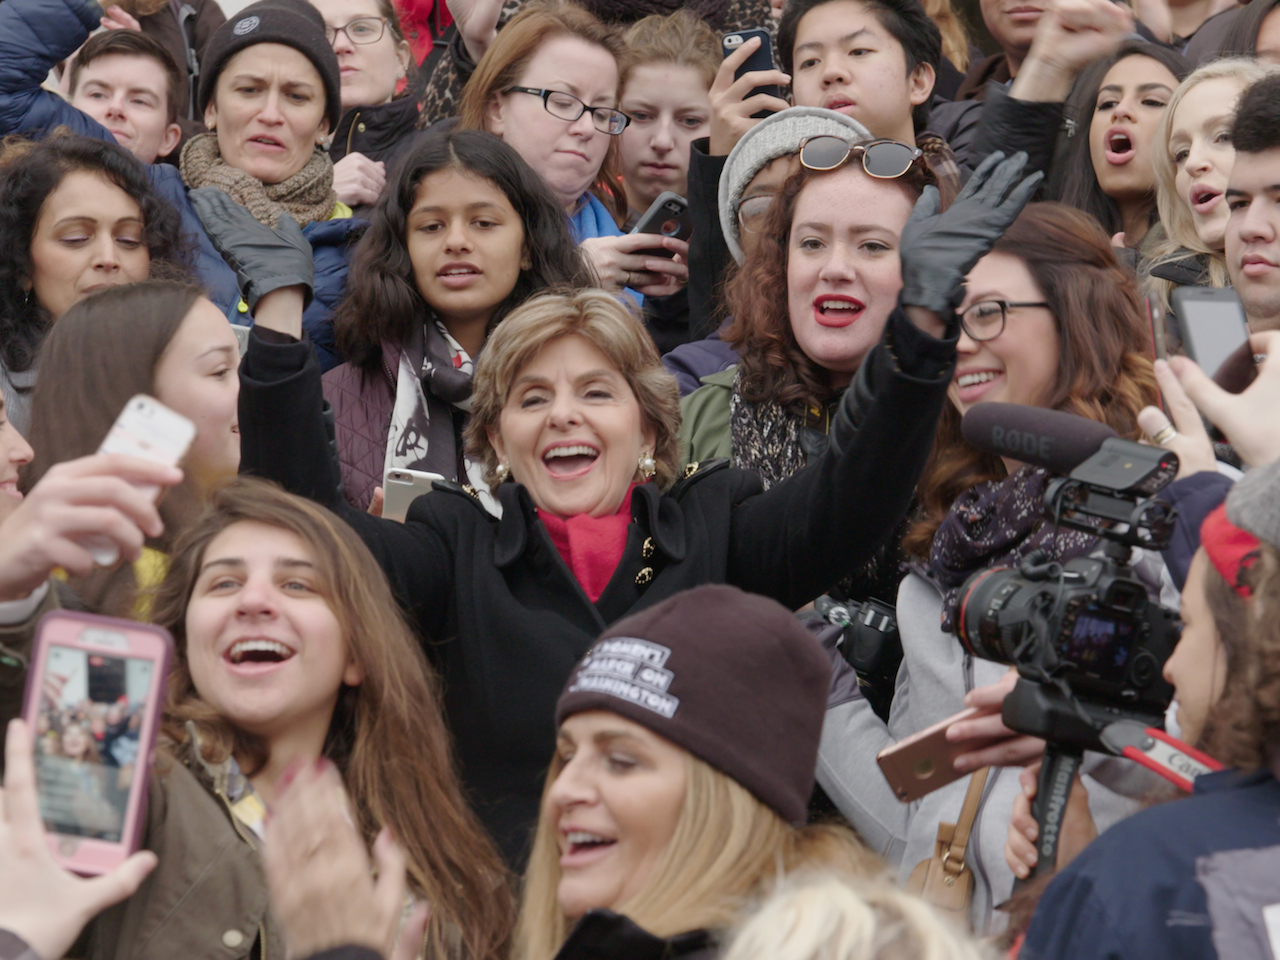 Netflix February-SEEING ALLRED movie still of Allred surrounded by young women. Documentary on Netflix February 2018